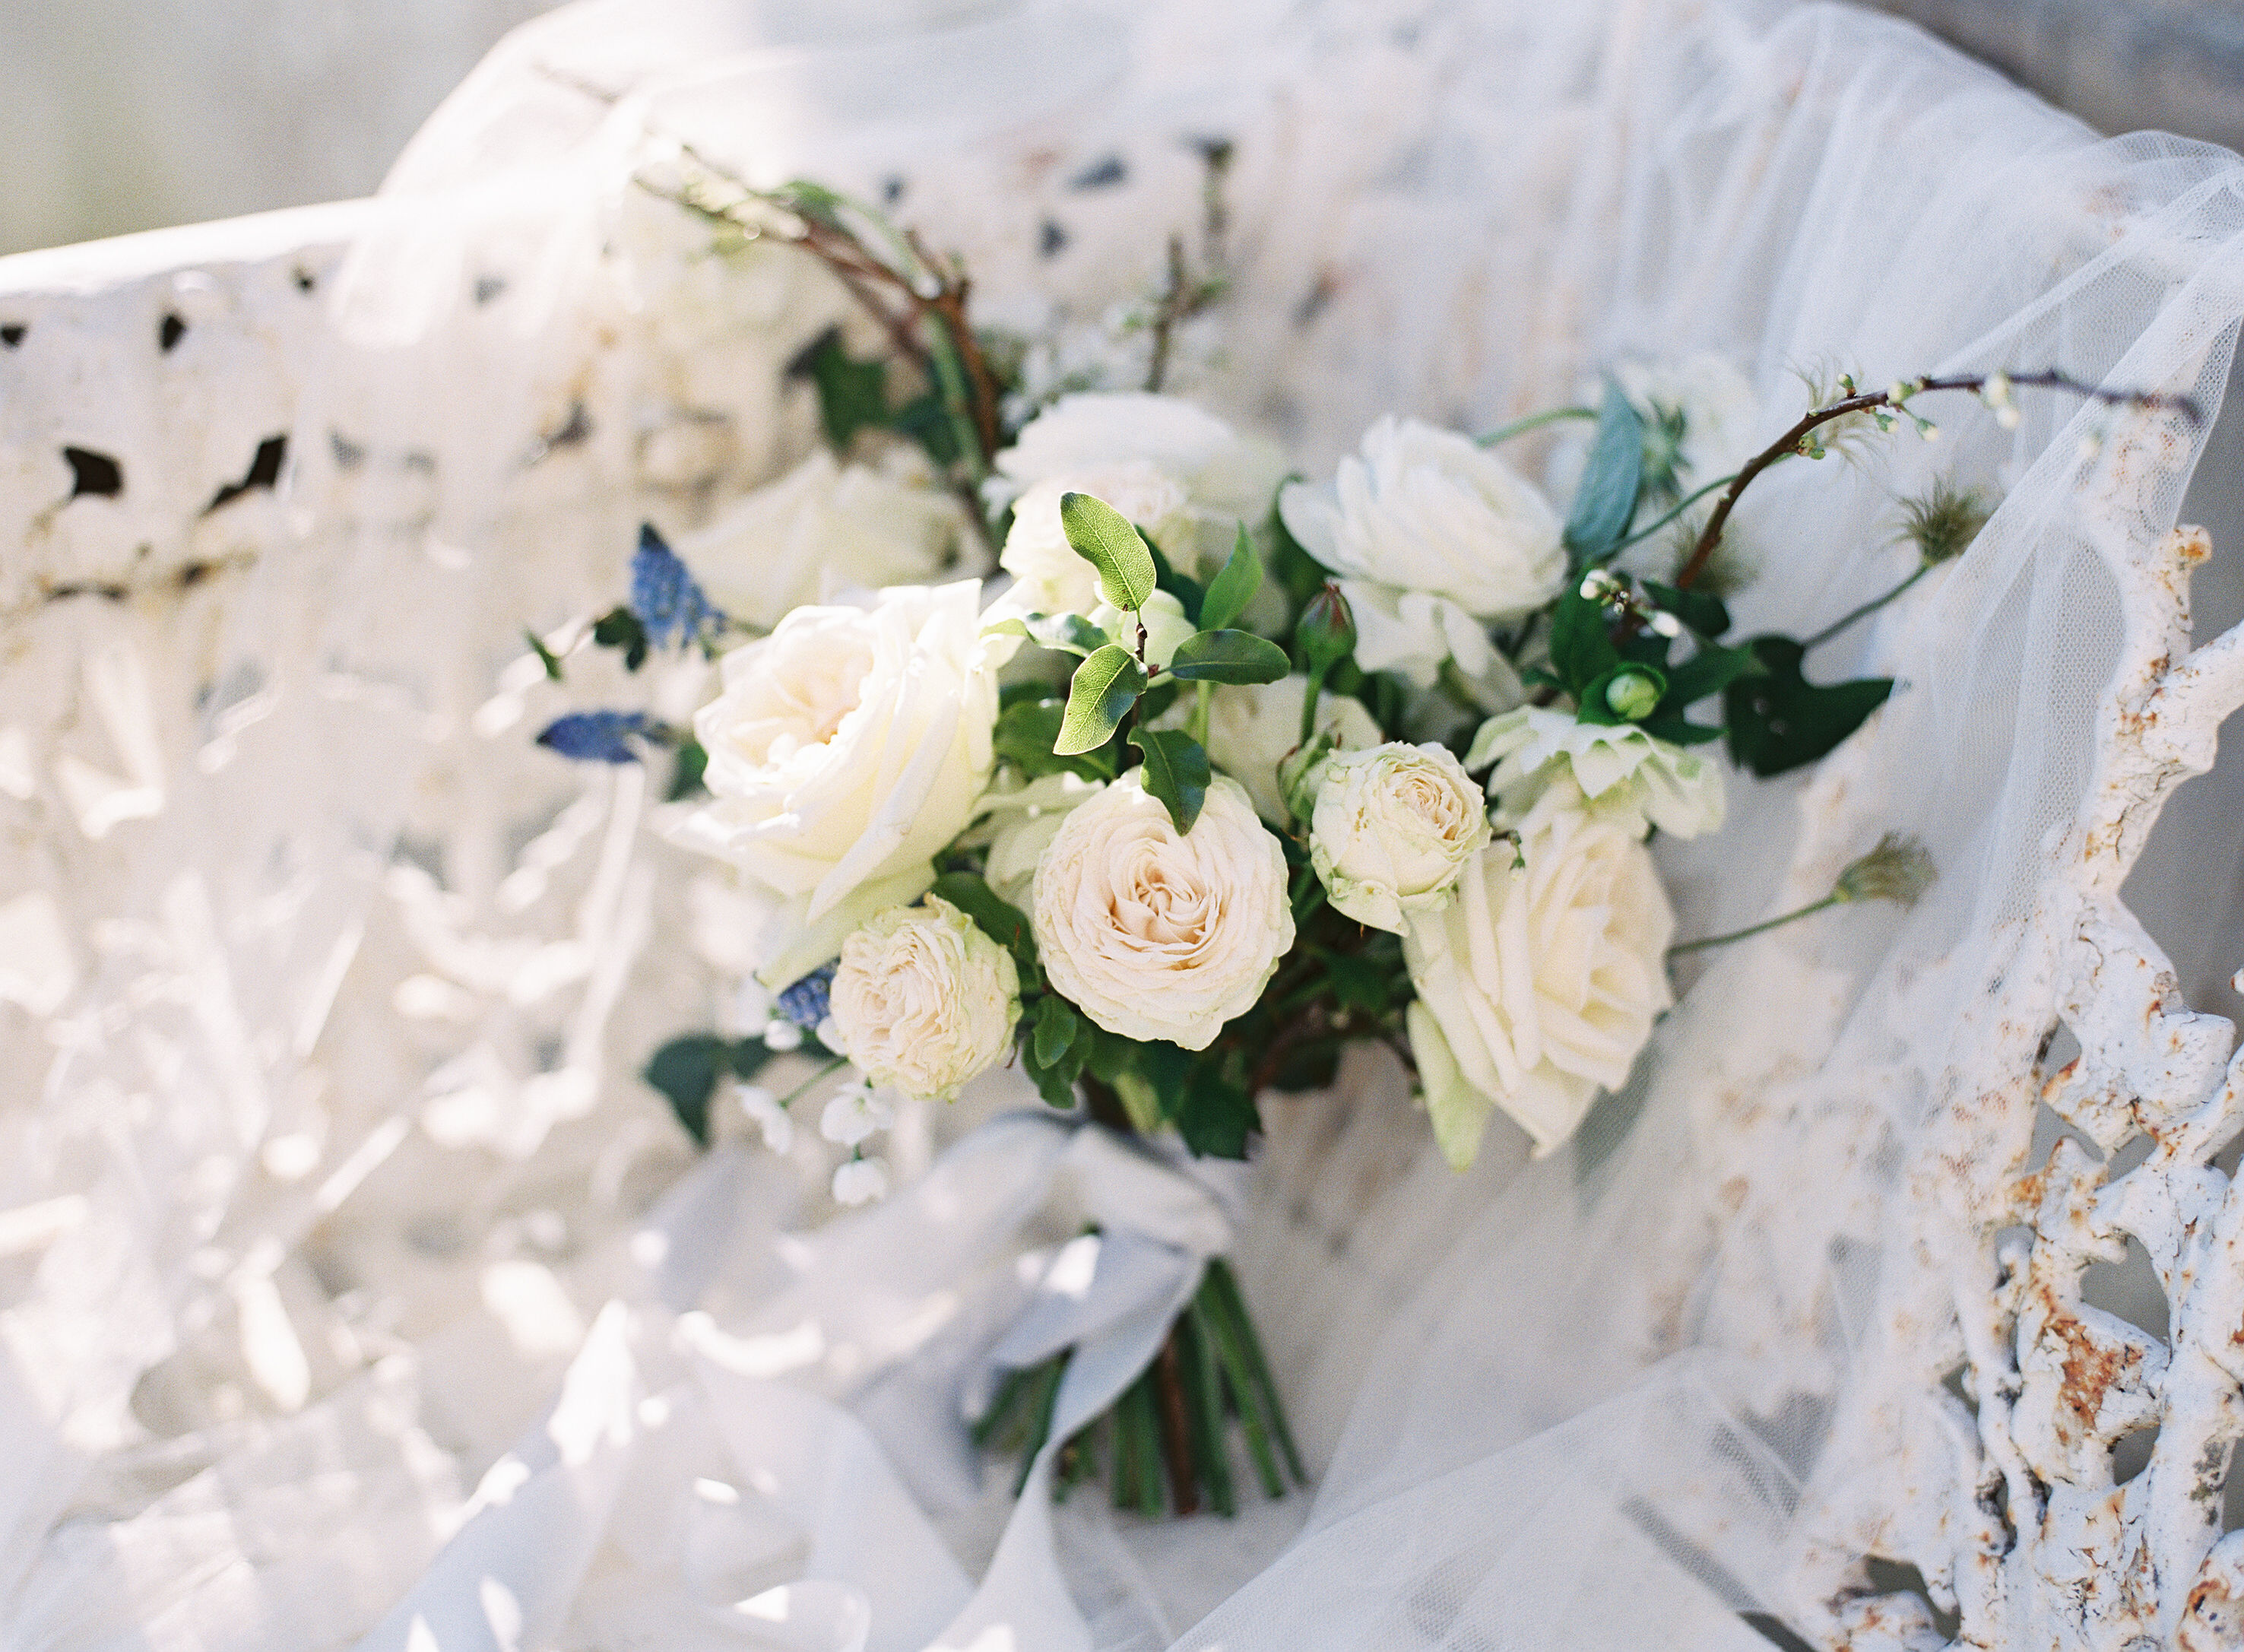 Dreamy organic florals in this bridal bouquet from Blue Sky Flowers for Spring wedding inspiration. Photo by Camilla Arnhold